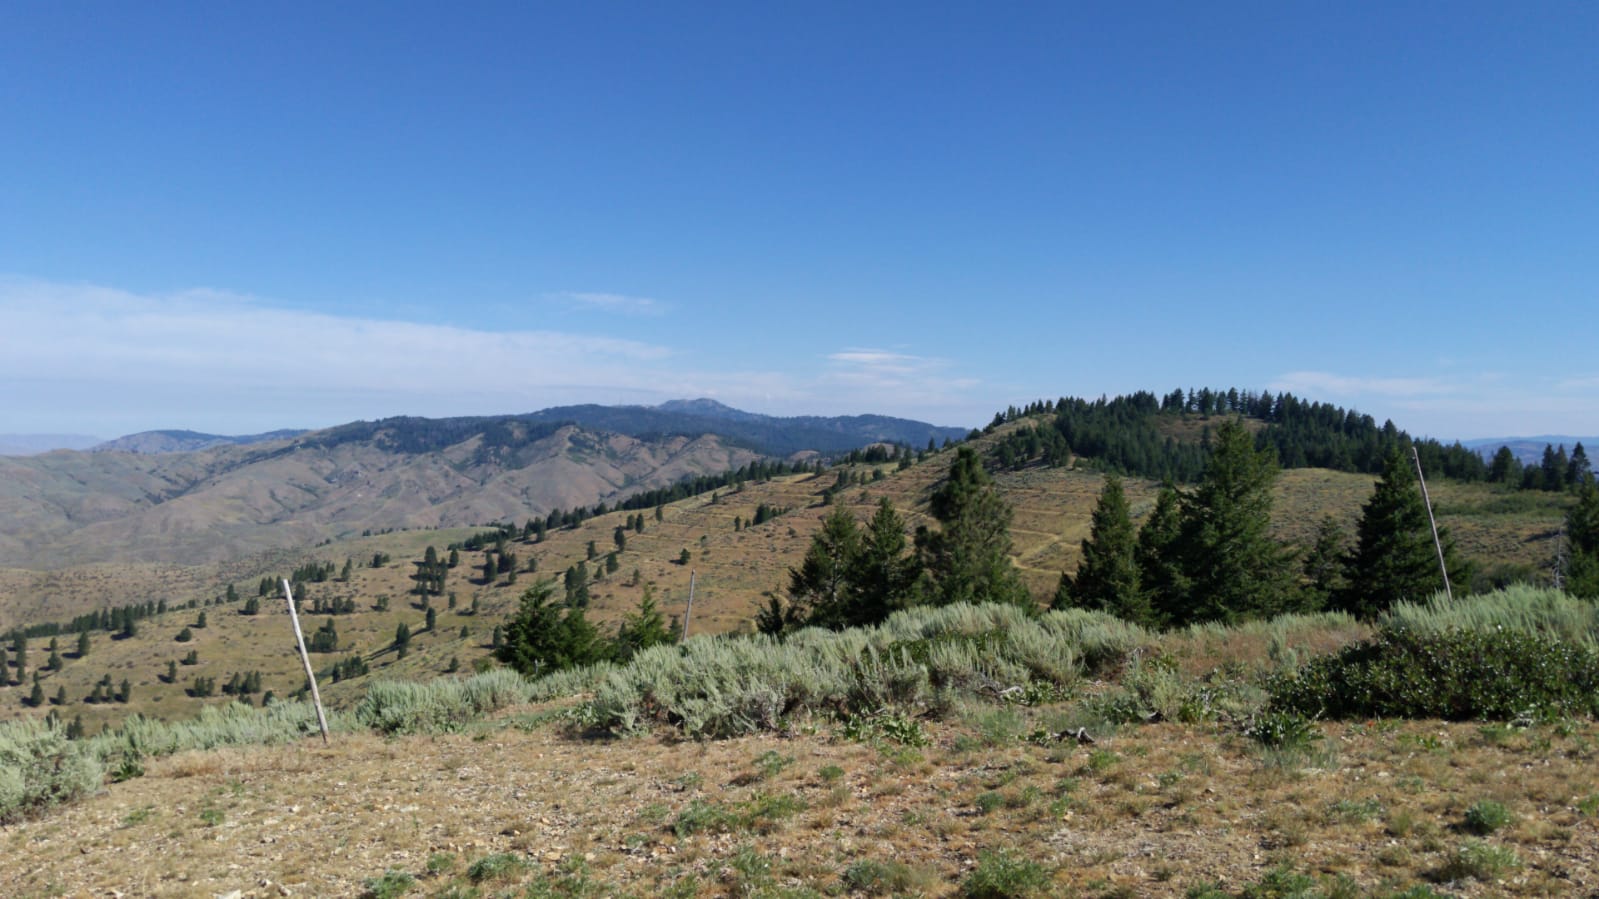 image shows view of the mountain landscape with some scattered trees and bushes in the foreground